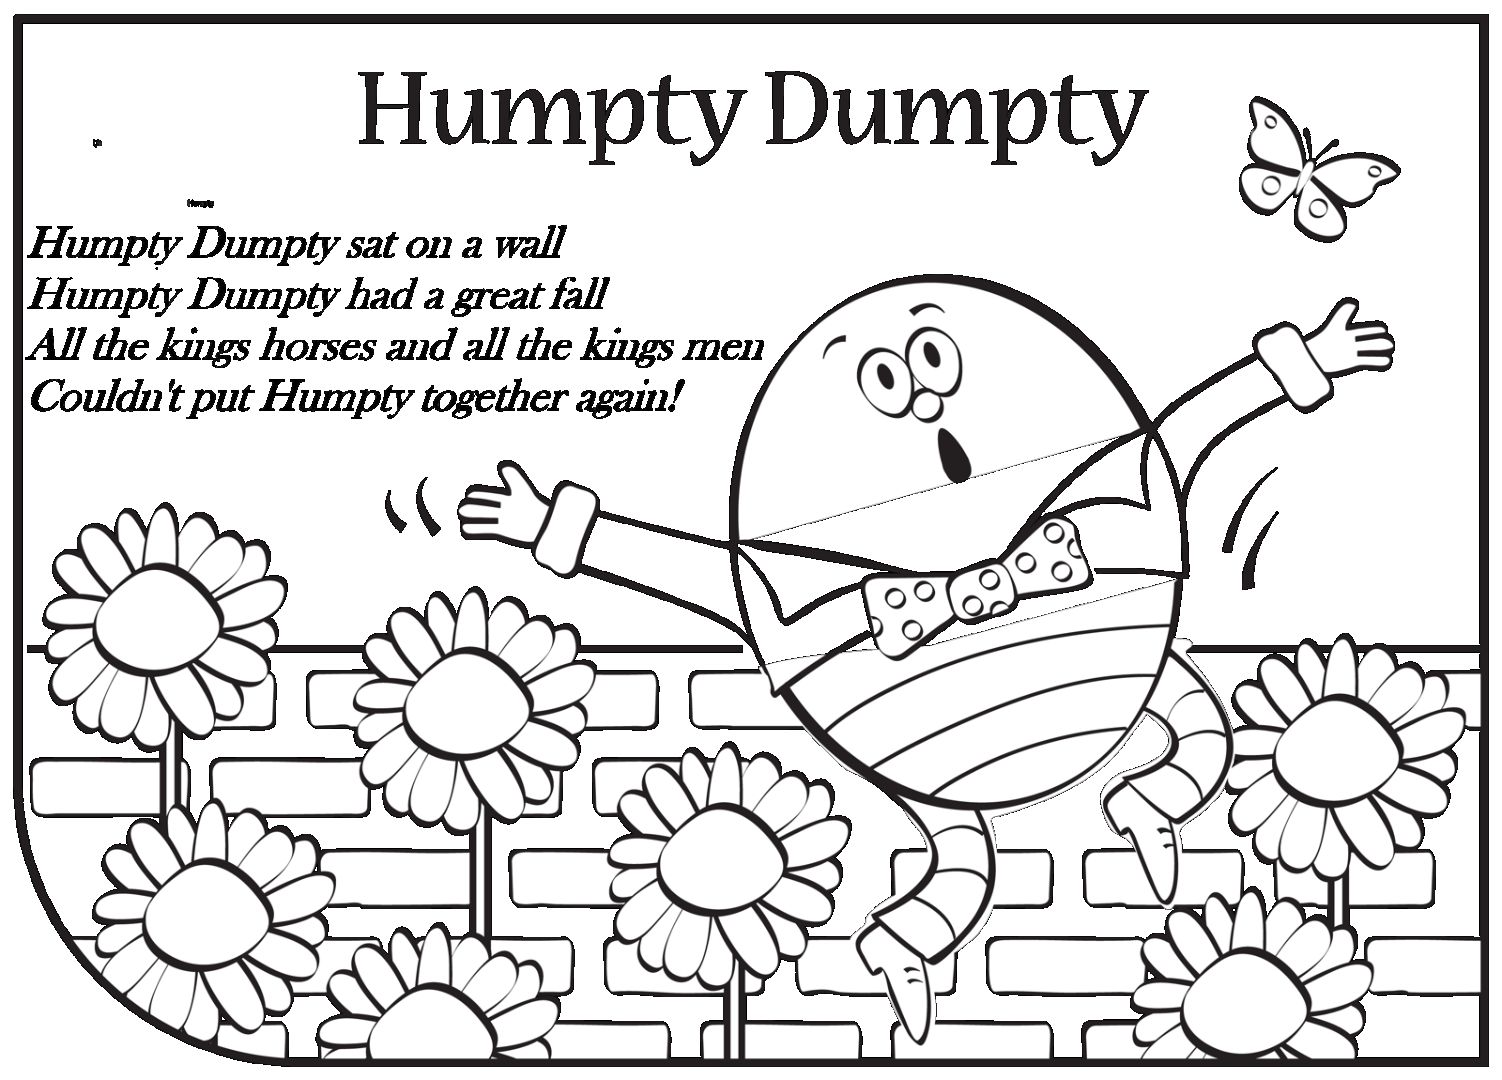 humpty-dumpty-coloring-page-at-getdrawings-free-download